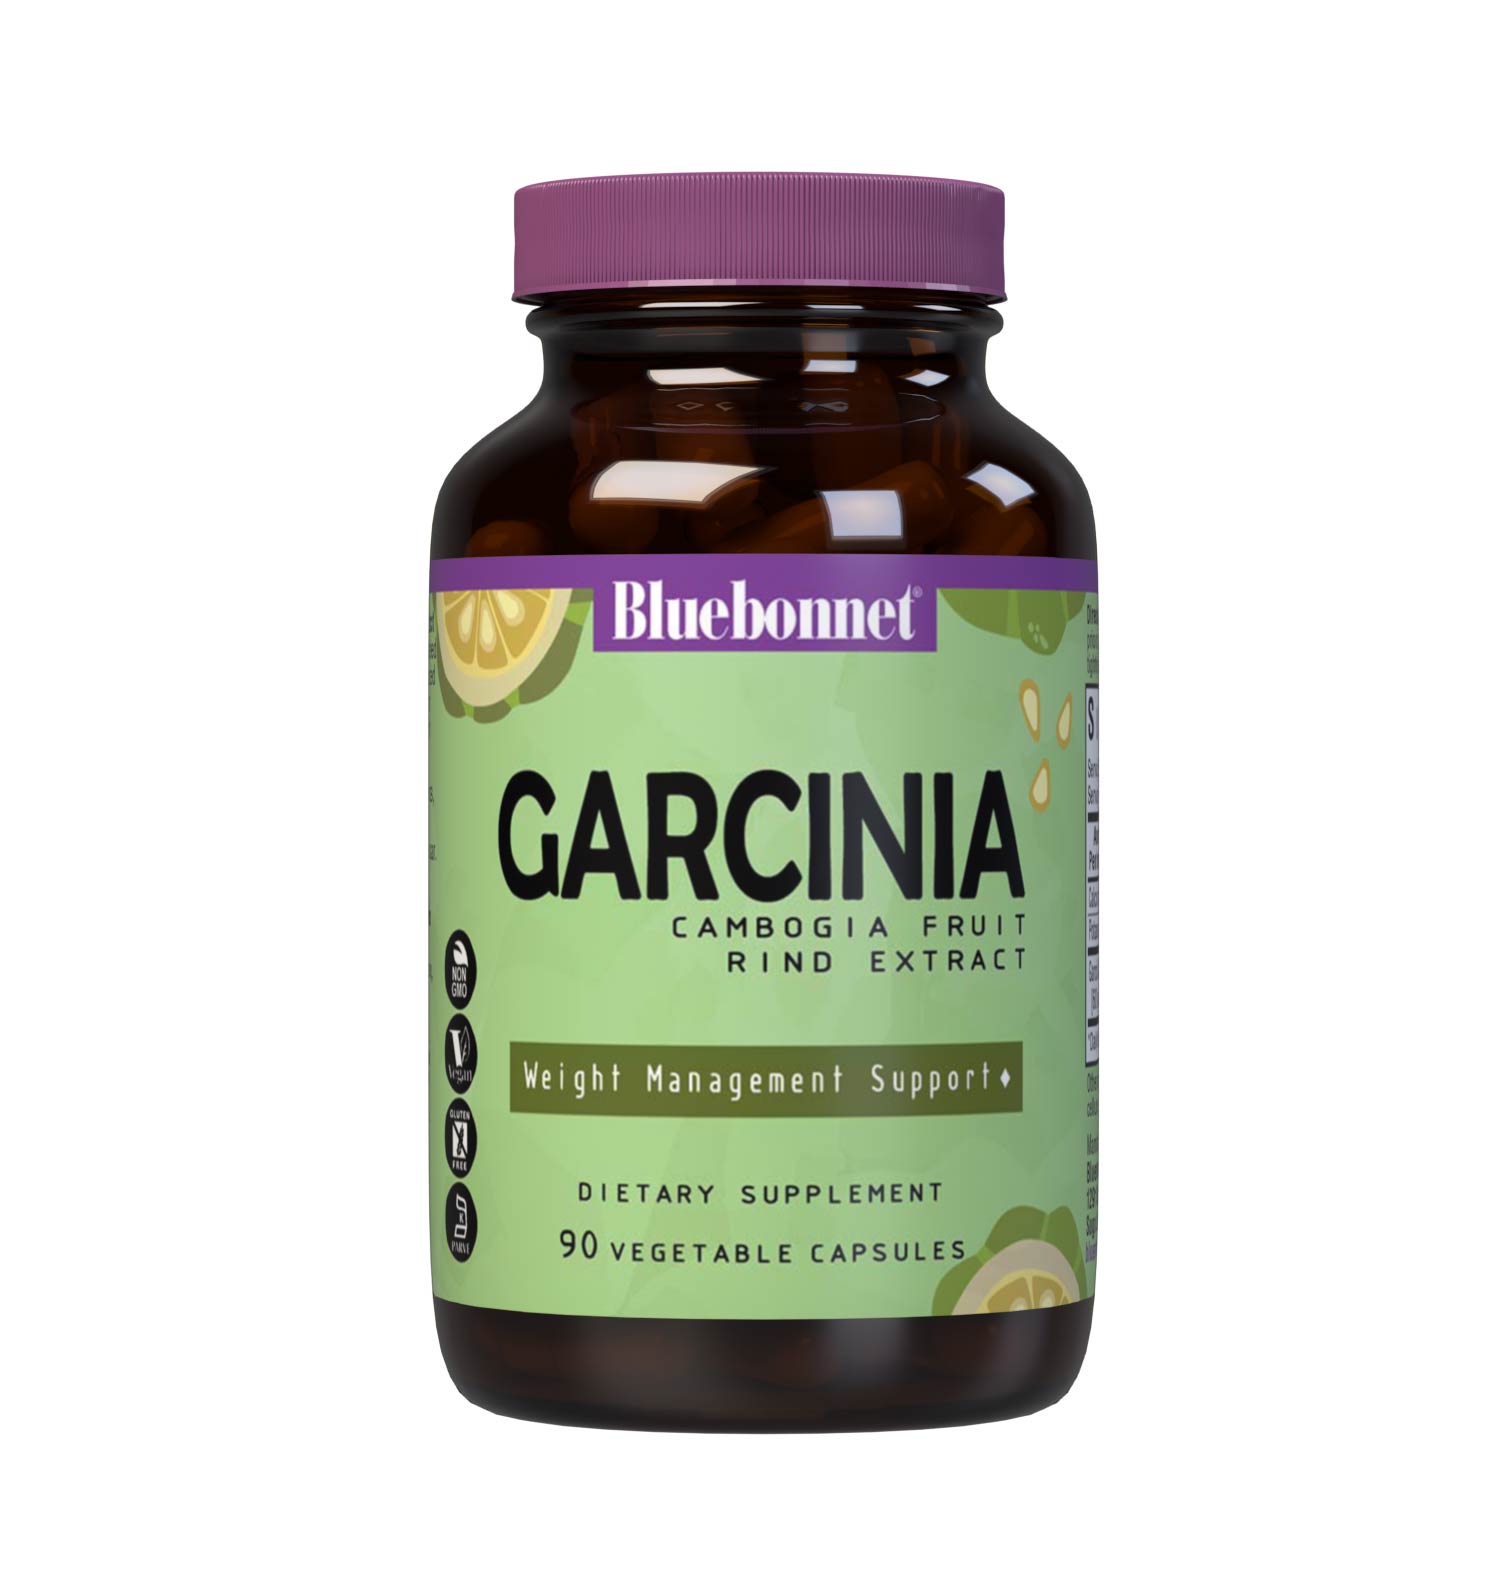 Bluebonnet’s Super Fruit Garcinia Cambogia Fruit Rind Extract 90 Vegetable Capsules are formulated with a patented Garcinia cambogia extract, known as Super CitriMax, that is standardized for 60% hydroxycitric acid (HCA). When combined with proper diet and exercise, HCA may support healthy weight management by inhibiting fat production, burning fat, and curbing appetite. #size_90 count